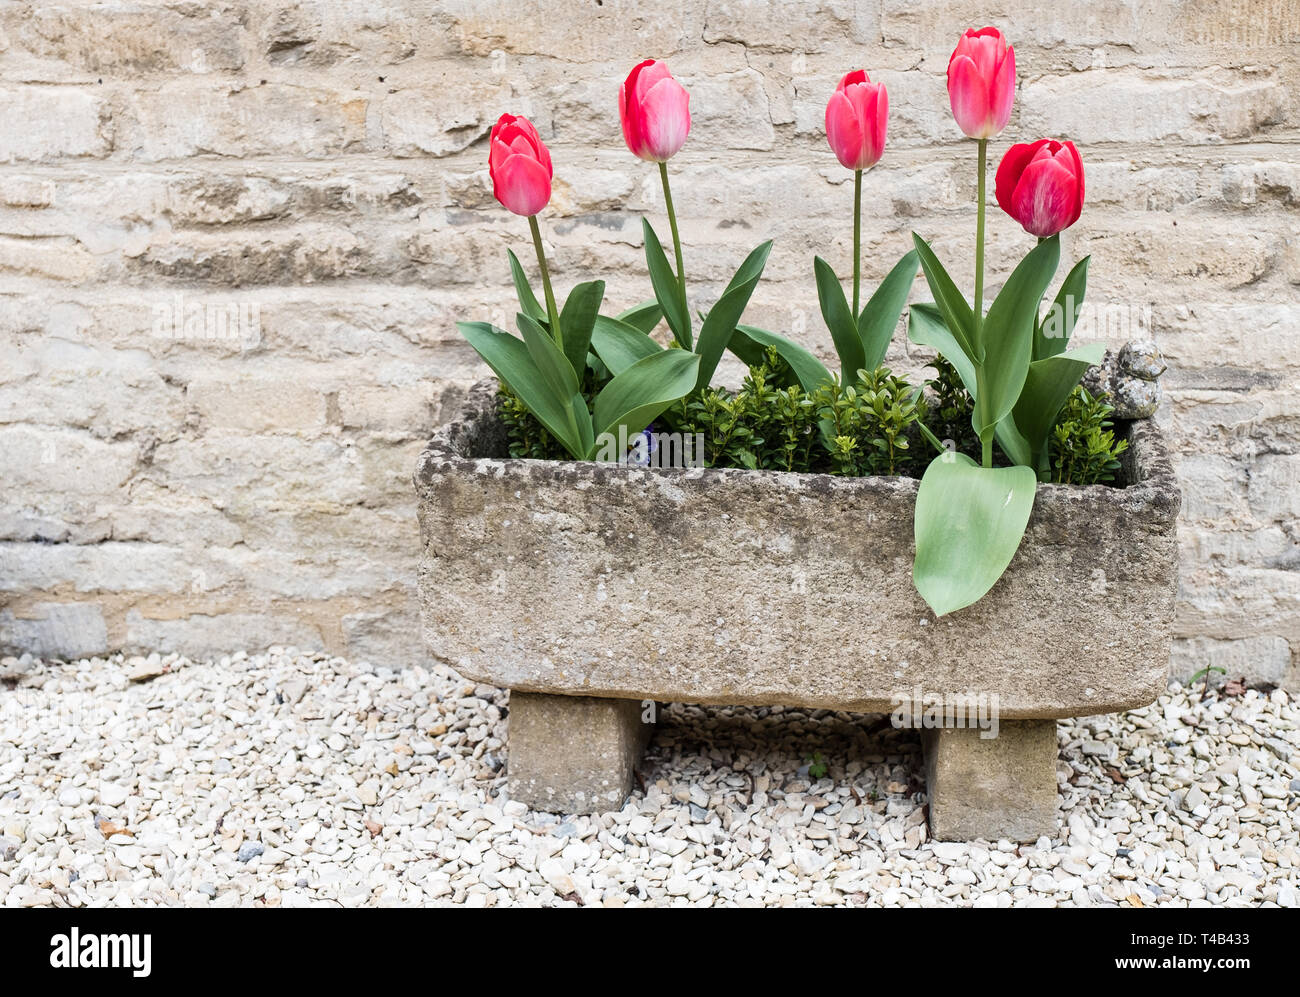 Pink tulips in a stone trough planter. Stock Photo